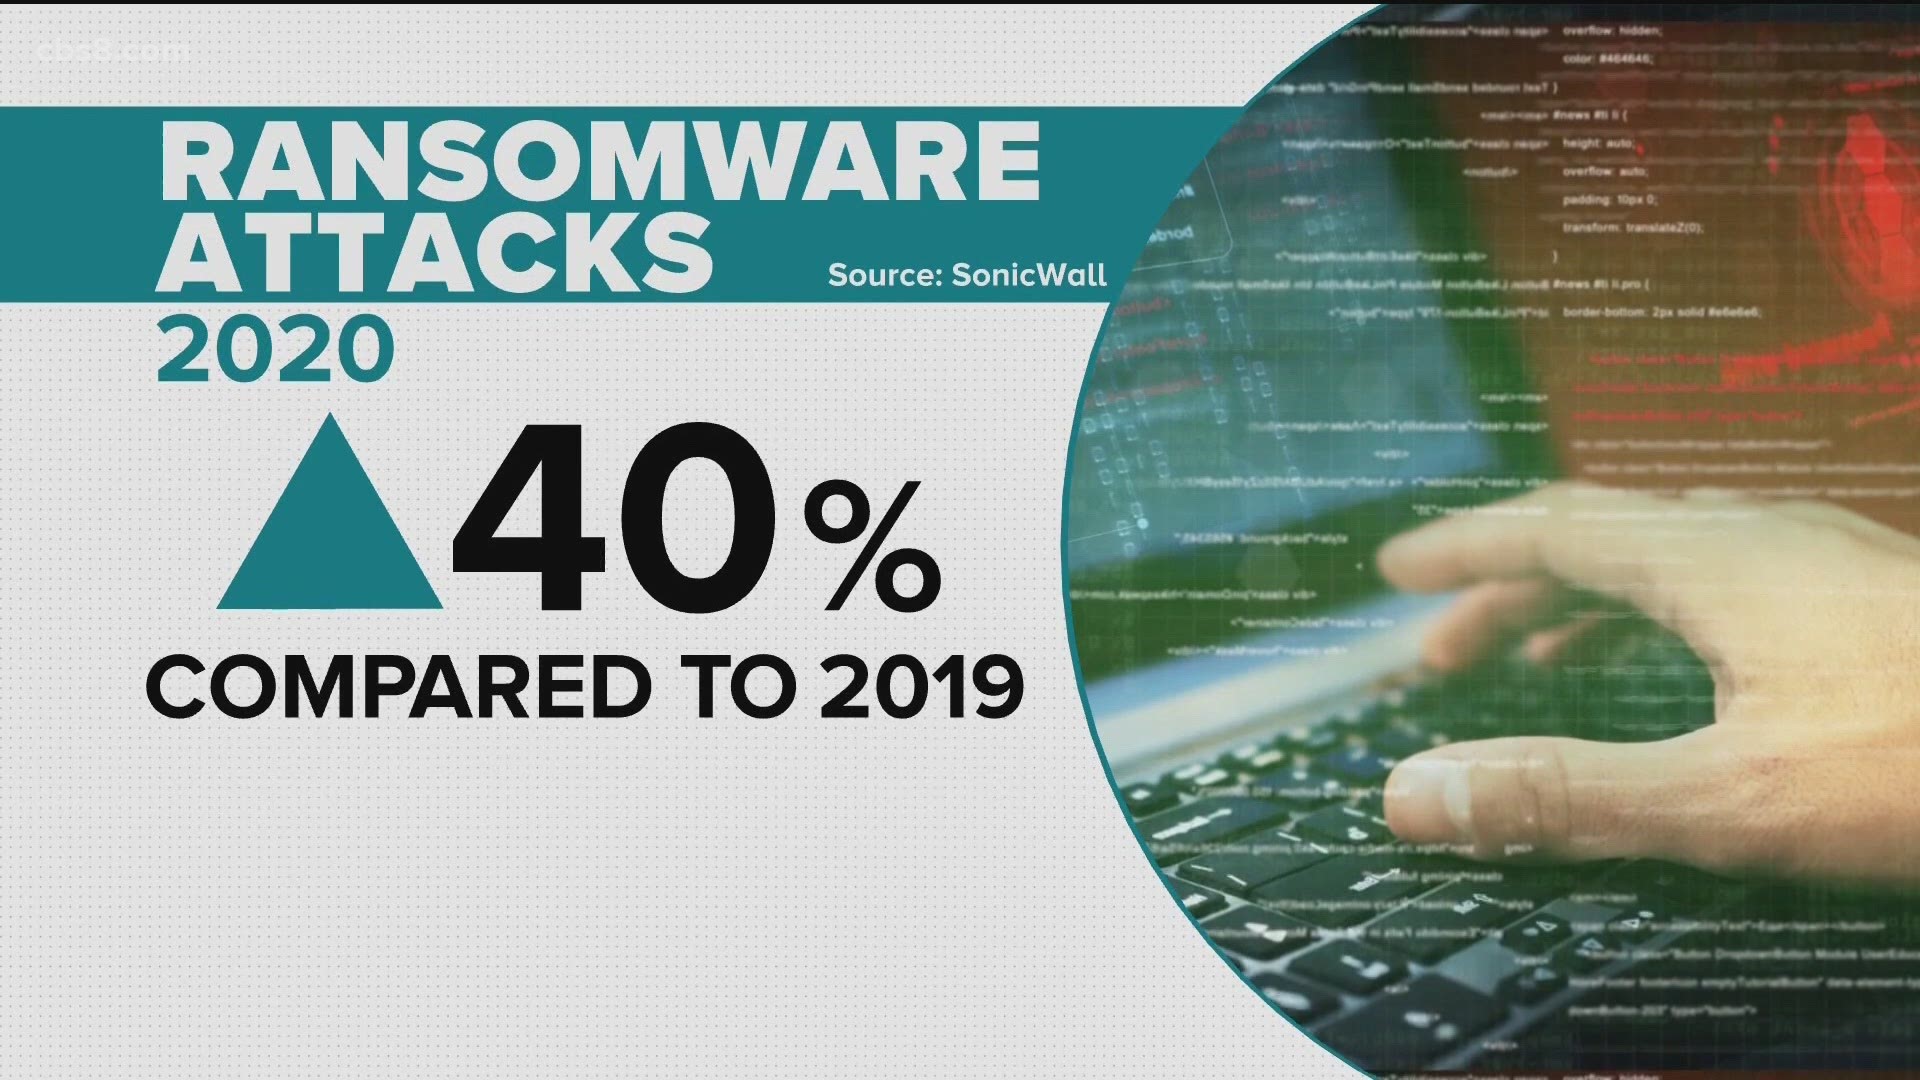 Ransomware typically starts with an email that convinces a user to download a file, provide sensitive login information or otherwise grant access.